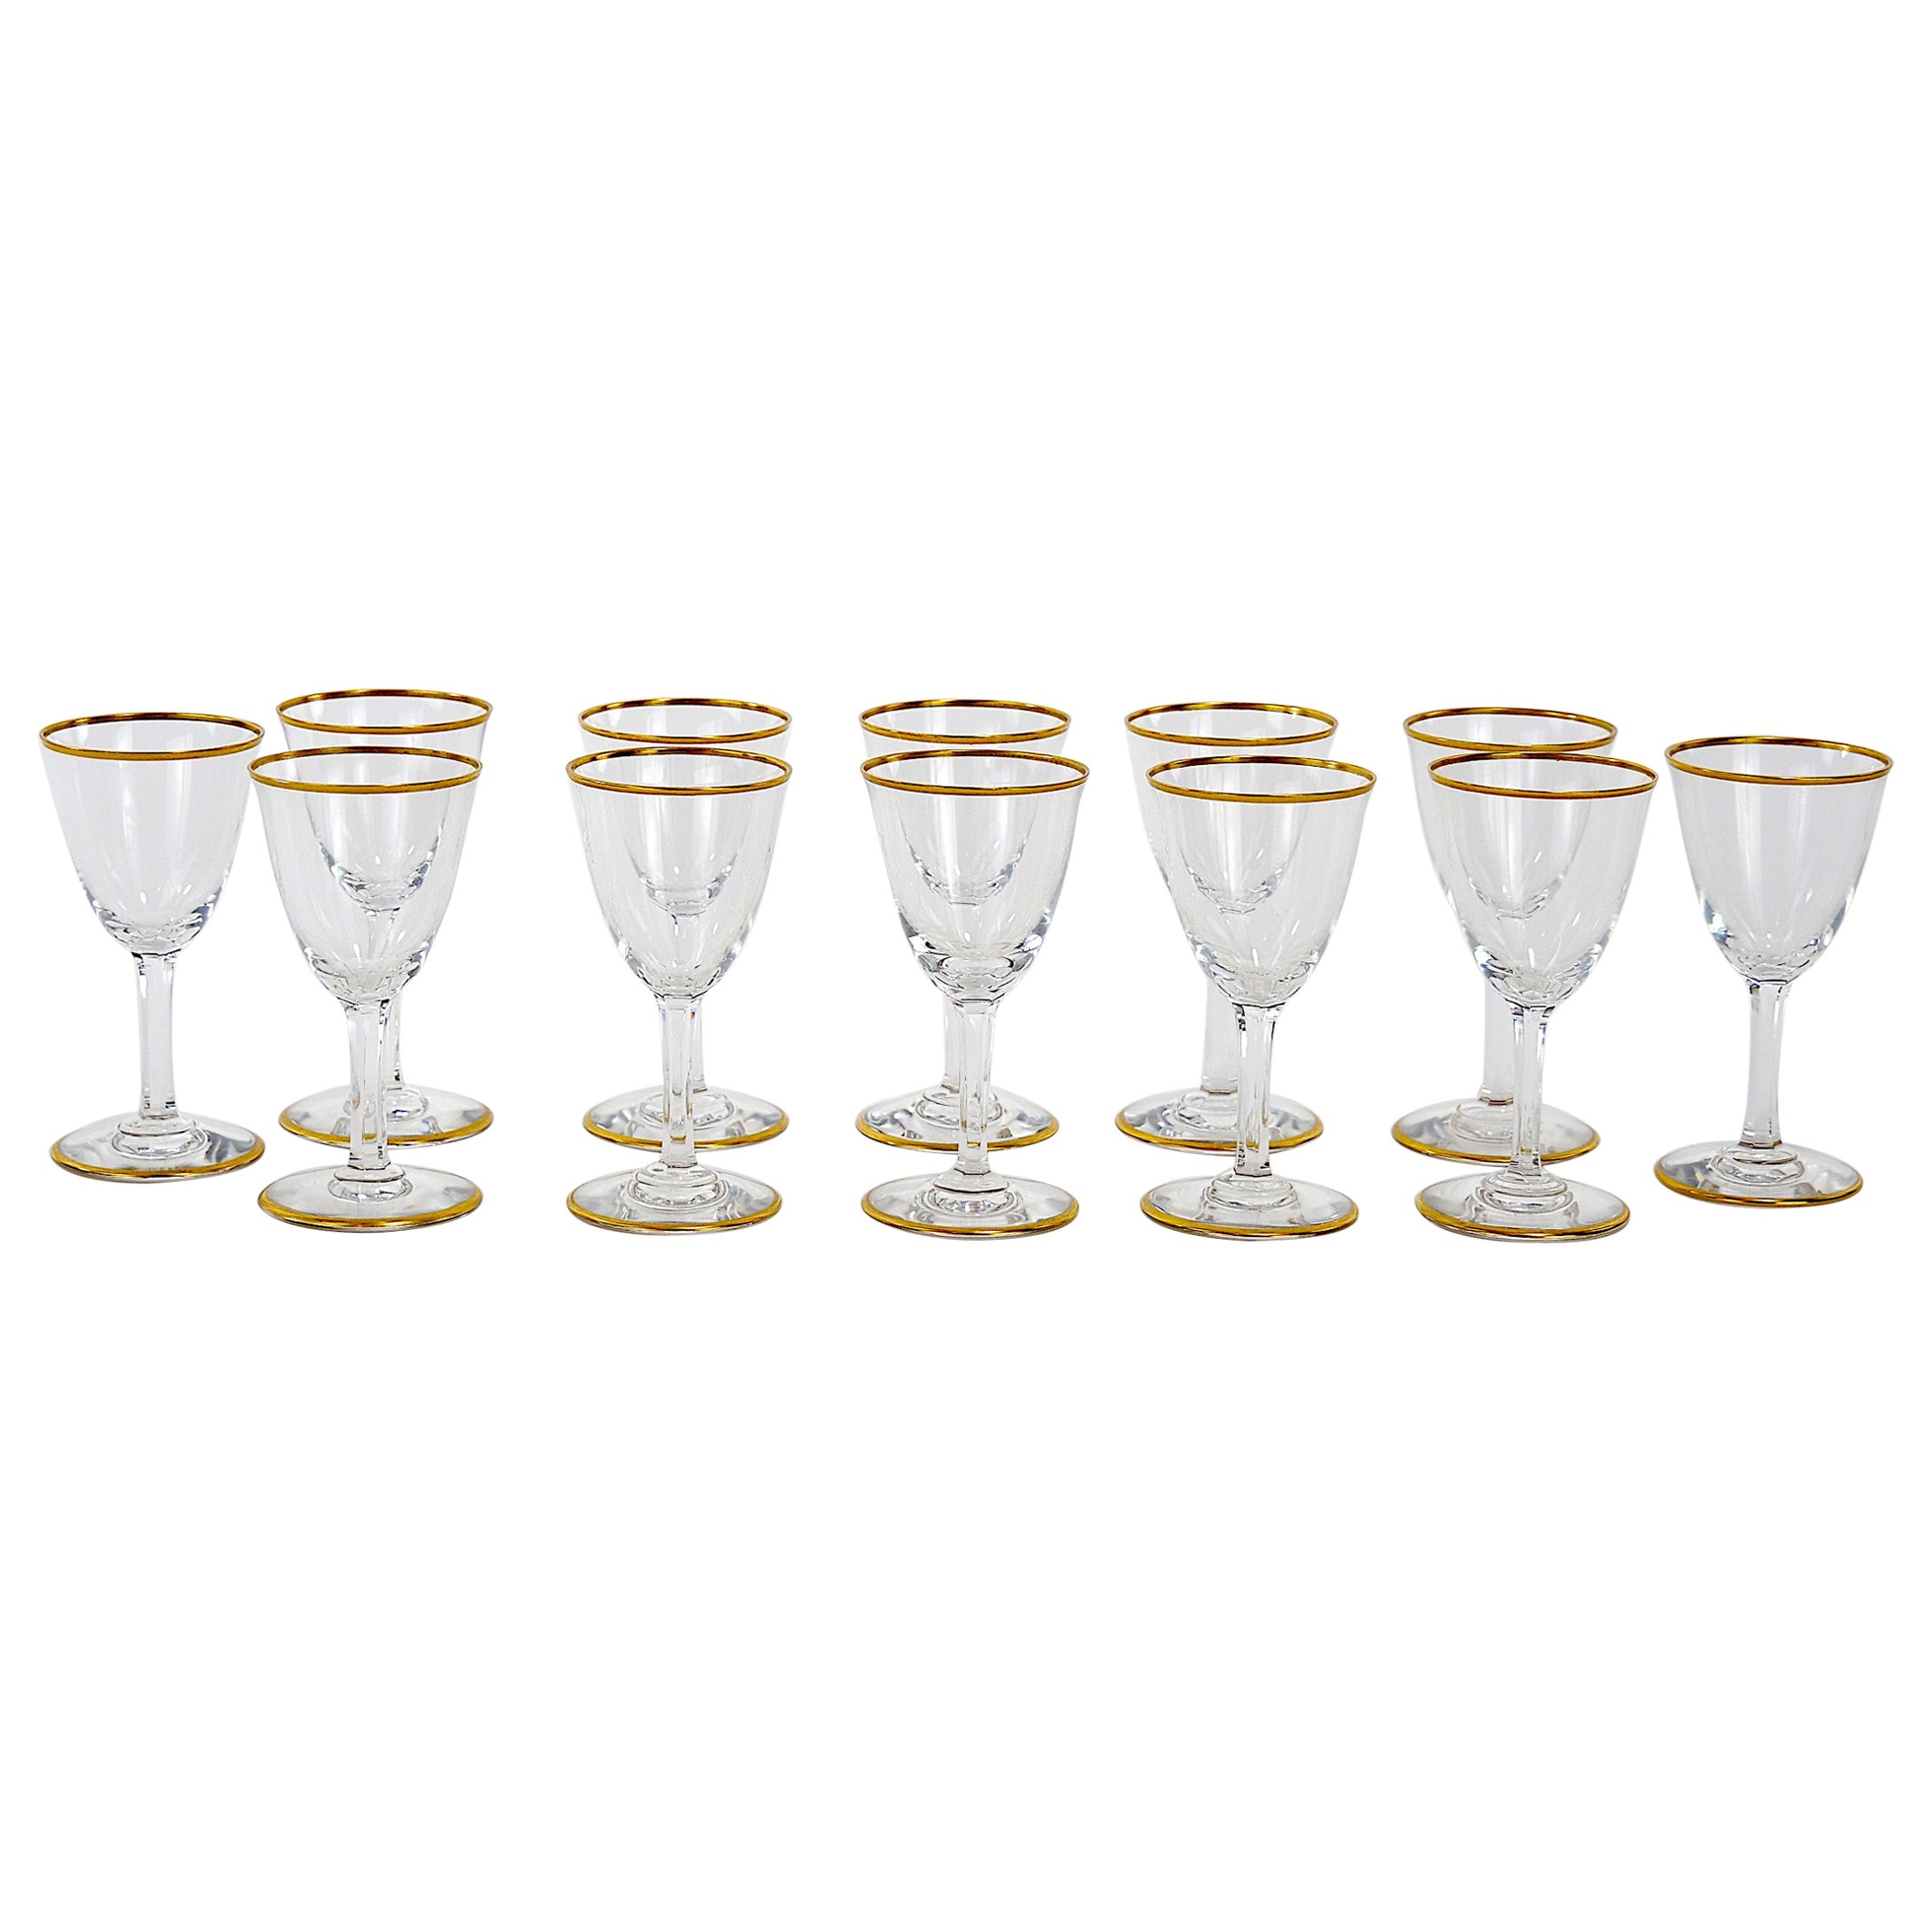 Baccarat Crystal Liquor / Sherry Glassware Service / 12 People For Sale